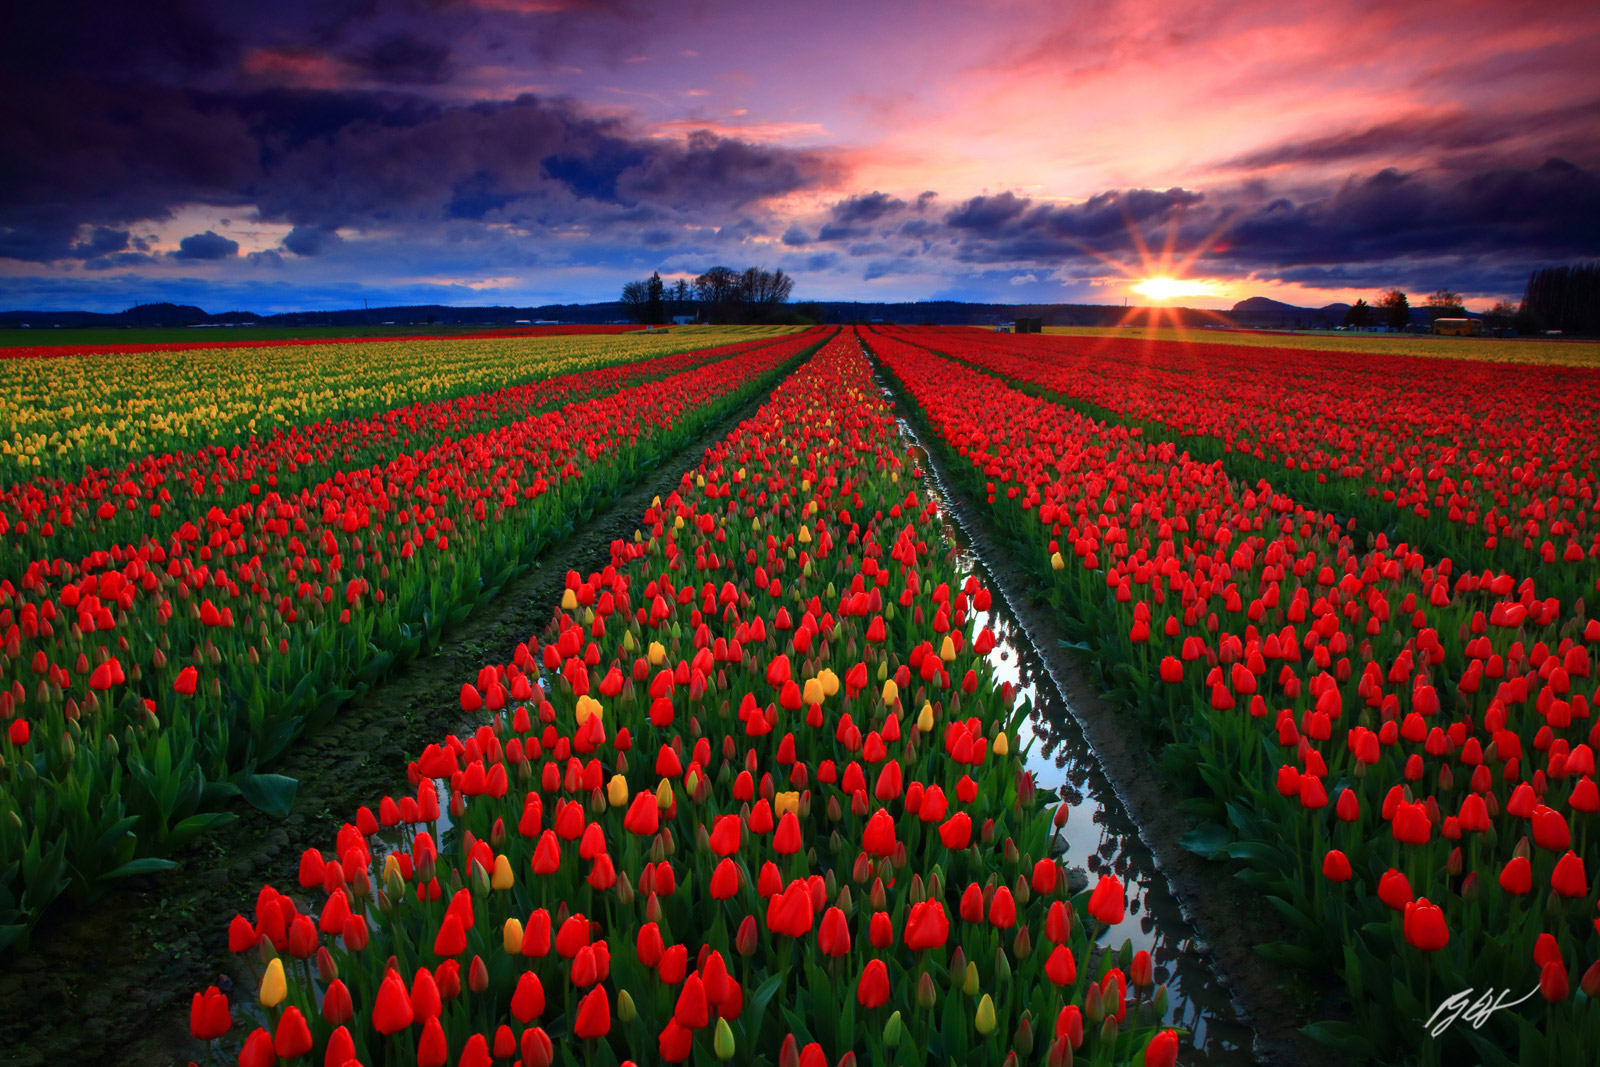 Sunset Sunstar over Roozengaarde Tulip Fileds located in the Skagit Valley in Washington